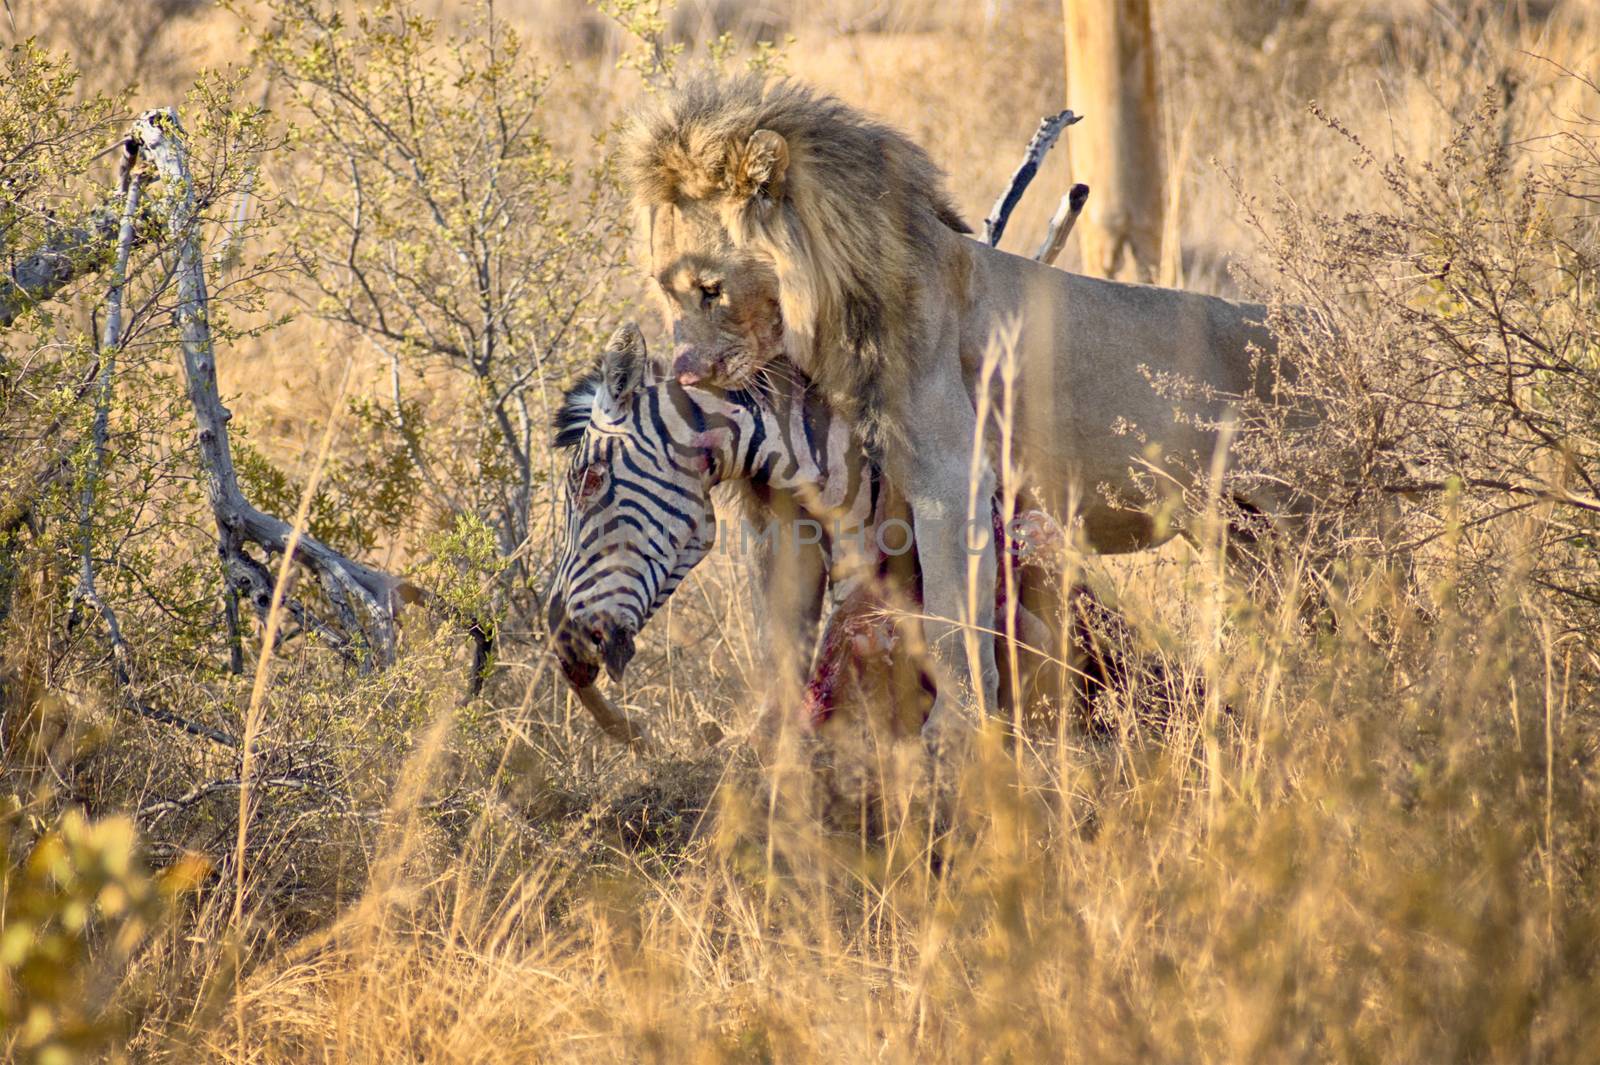 Male lion eating a zebra after hunt by Sportactive